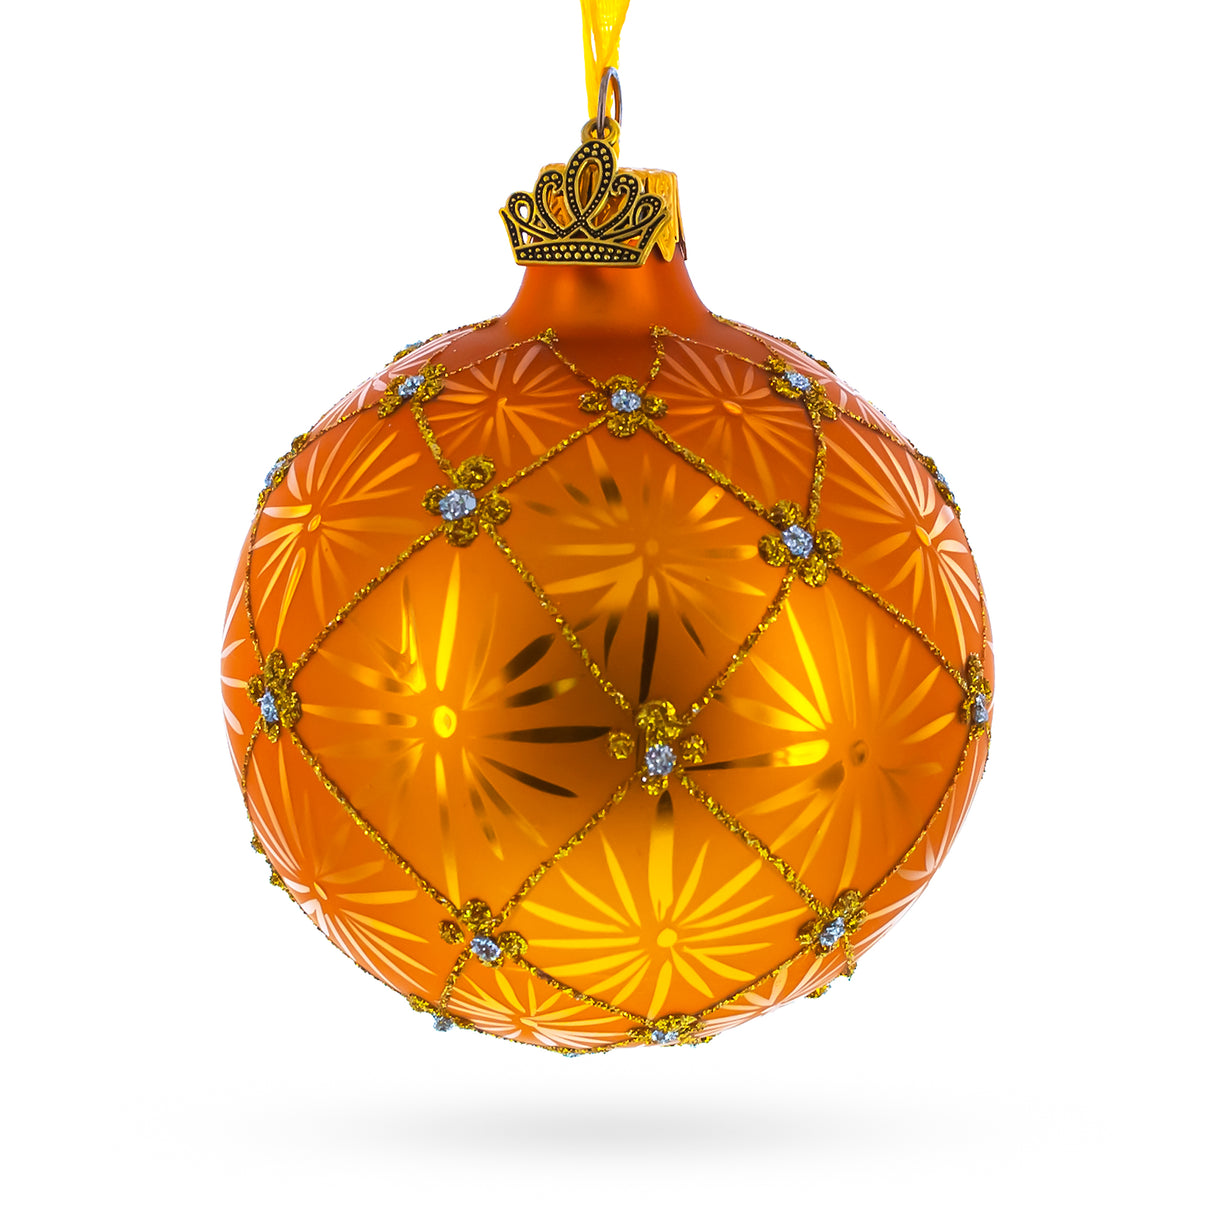 Regal 1897 Coronation Royal Egg Gold - Blown Glass Christmas Ornament 3.25 Inches in Gold color, Round shape